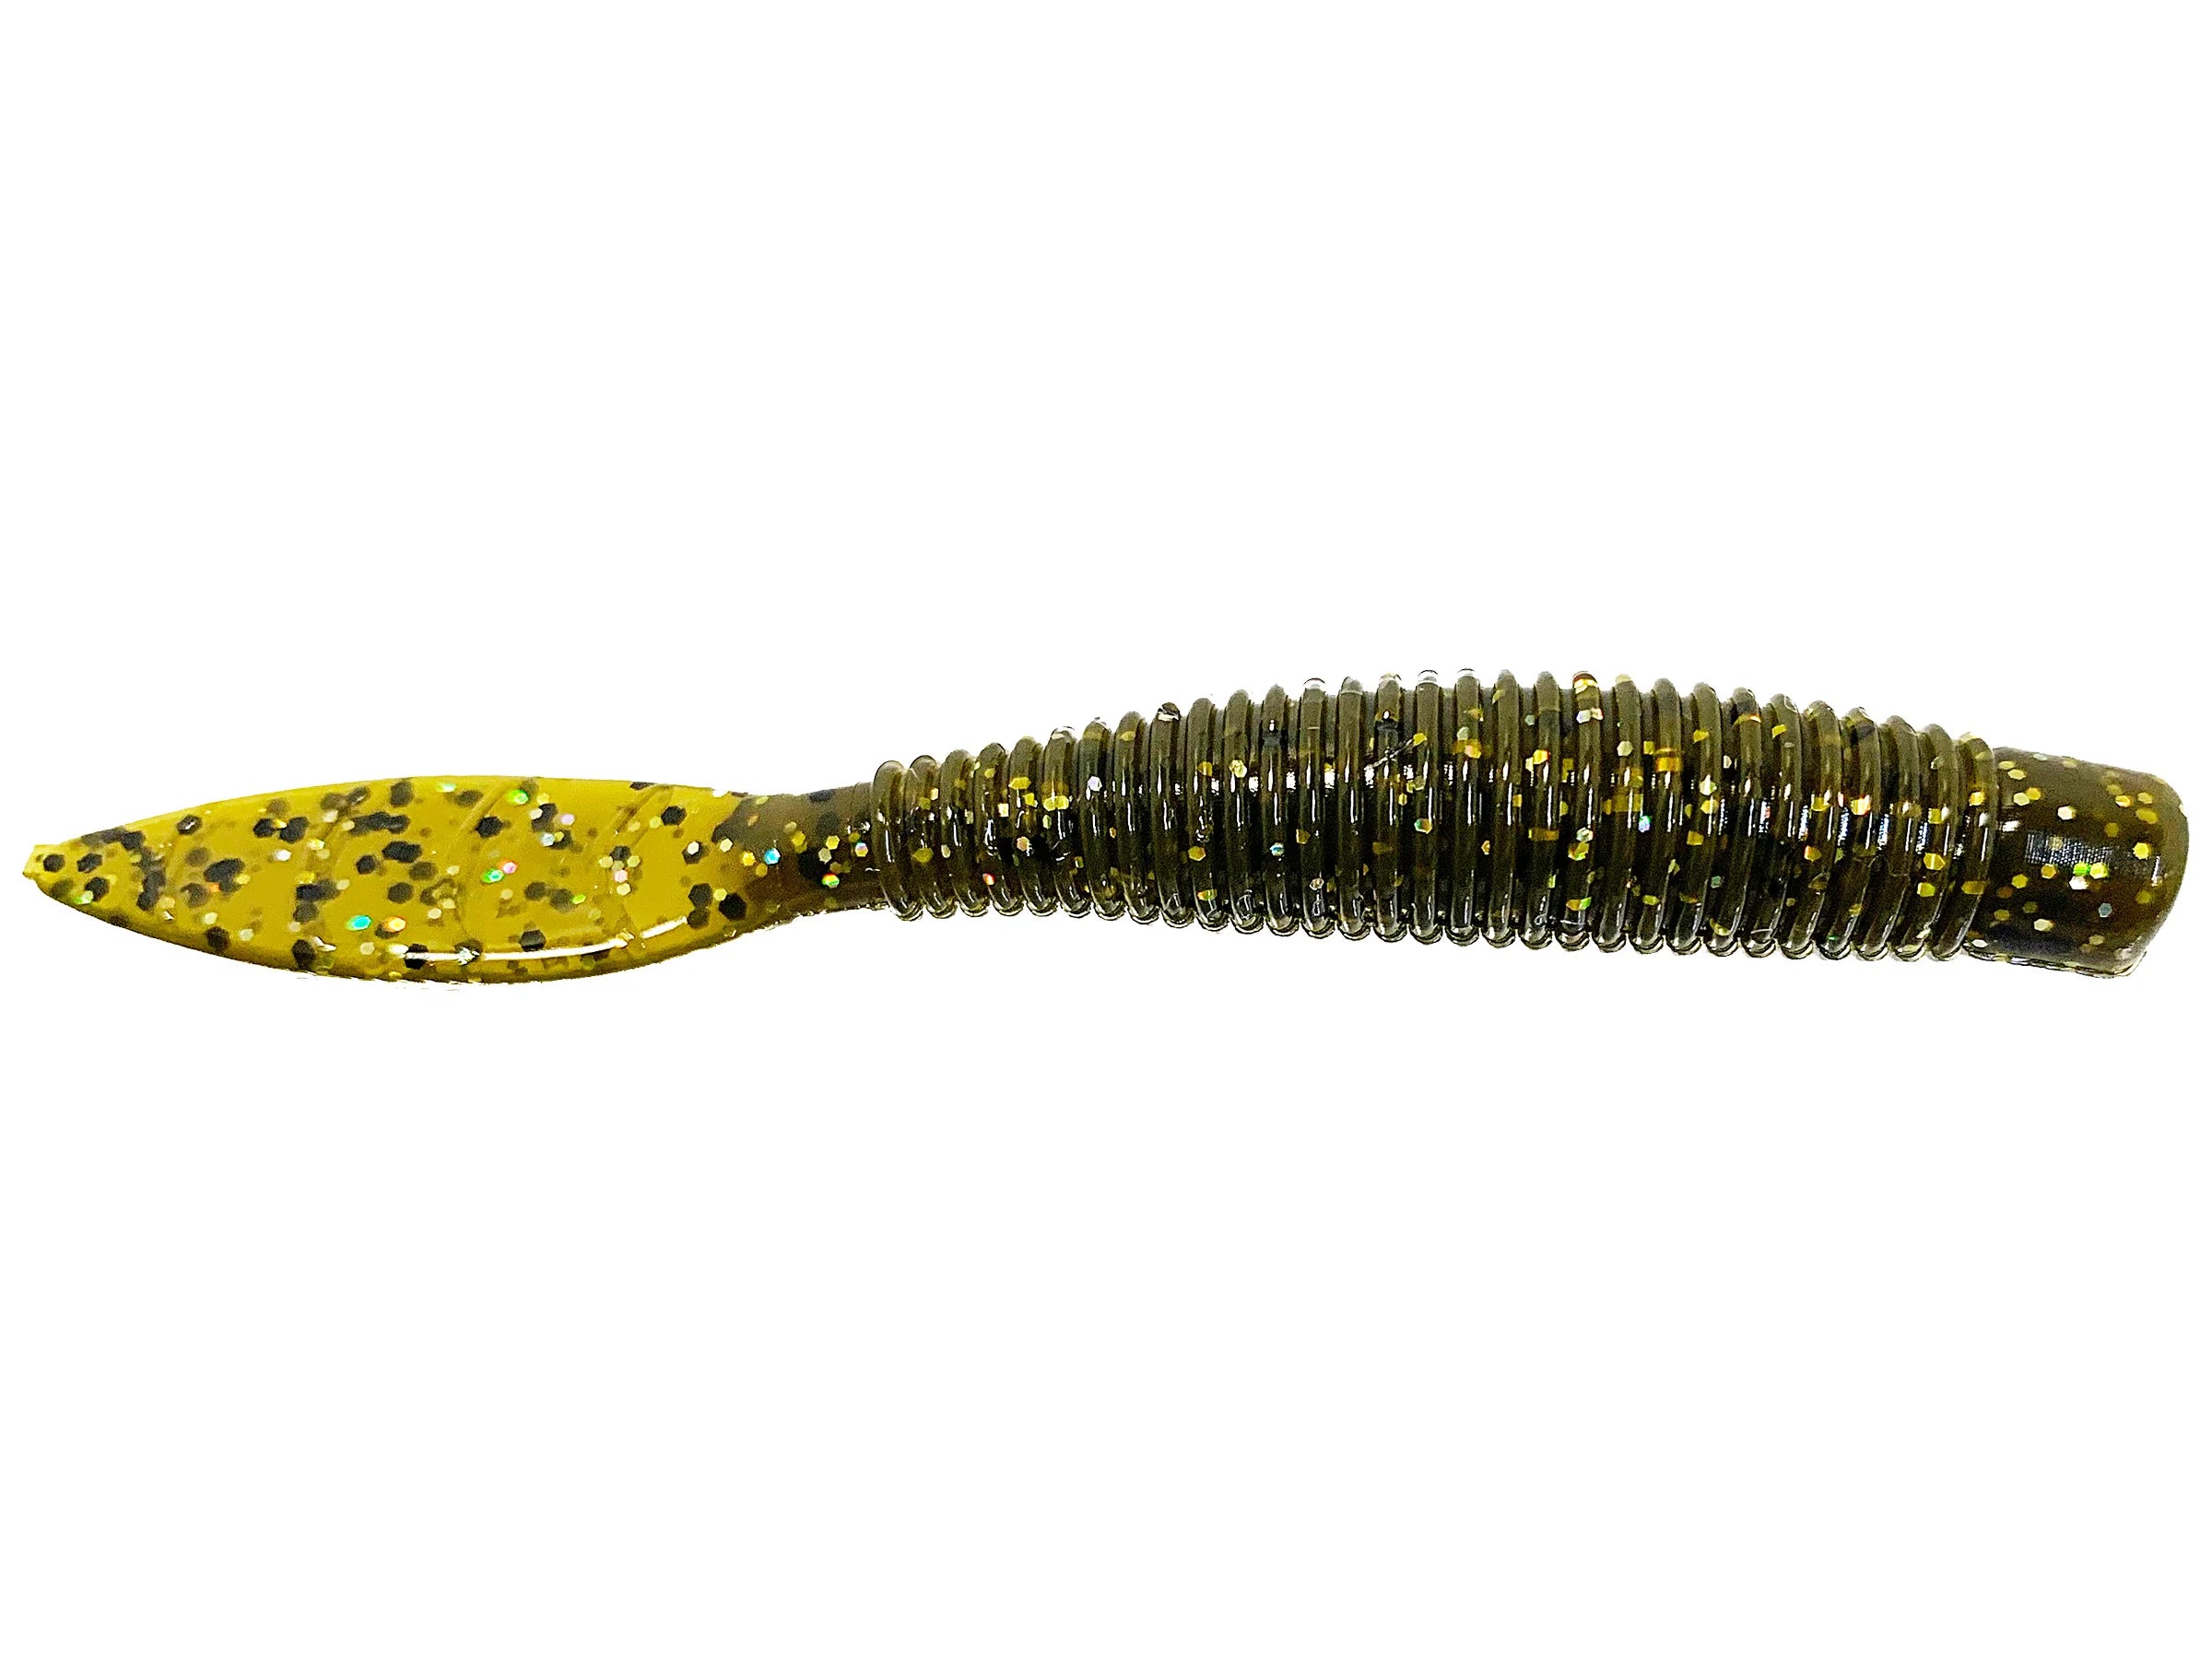 Buy Soft Plastic Worms Online, Bass Fishing Accessories